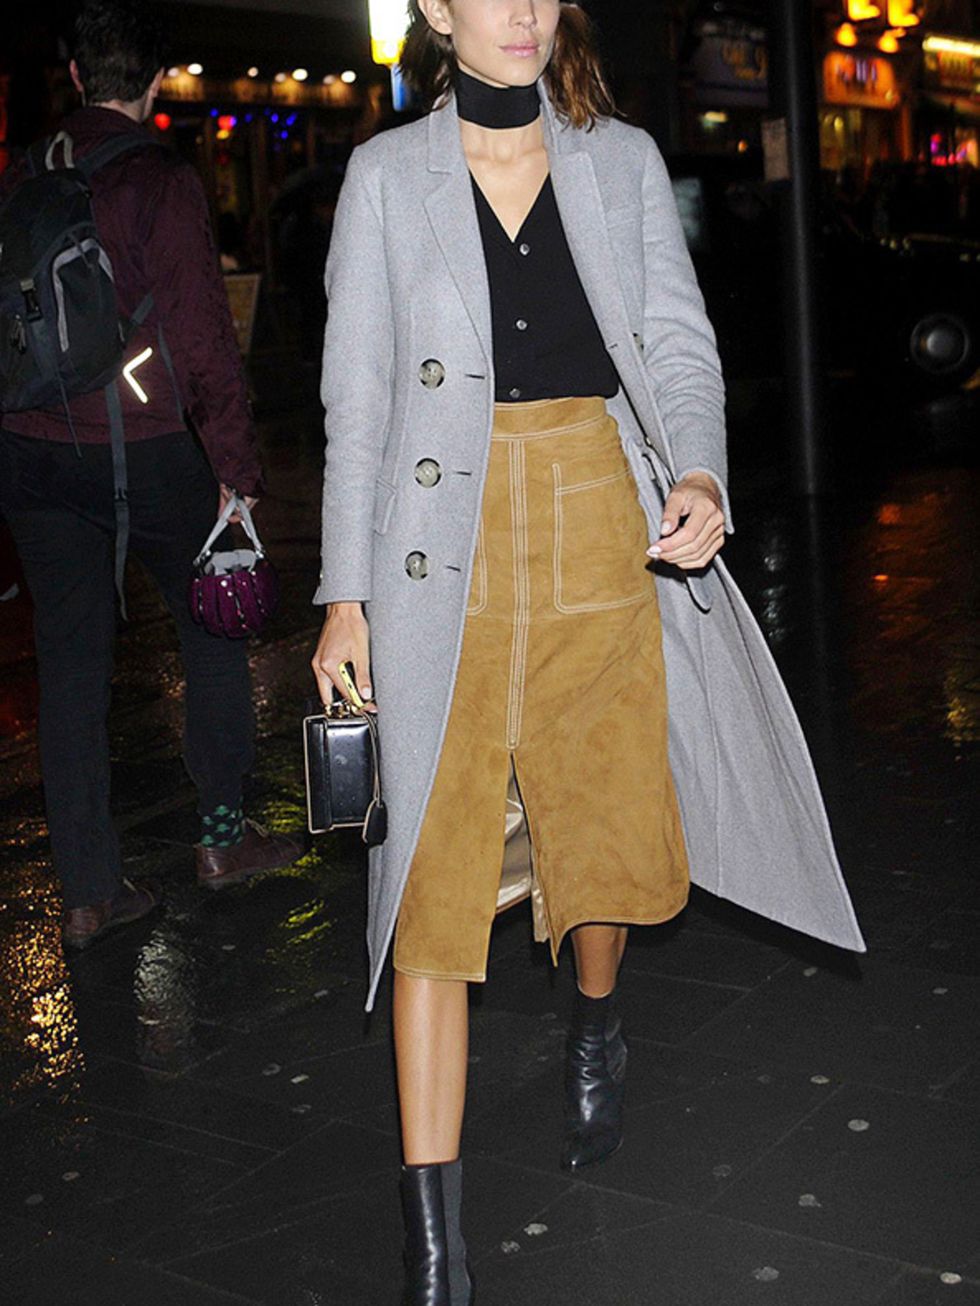 <p><a href="http://www.elleuk.com/fashion/celebrity-style/alexa-chung-s-style-file" target="_blank">Alexa Chung</a> wearing a Marks and Spencer suede skirt</p>